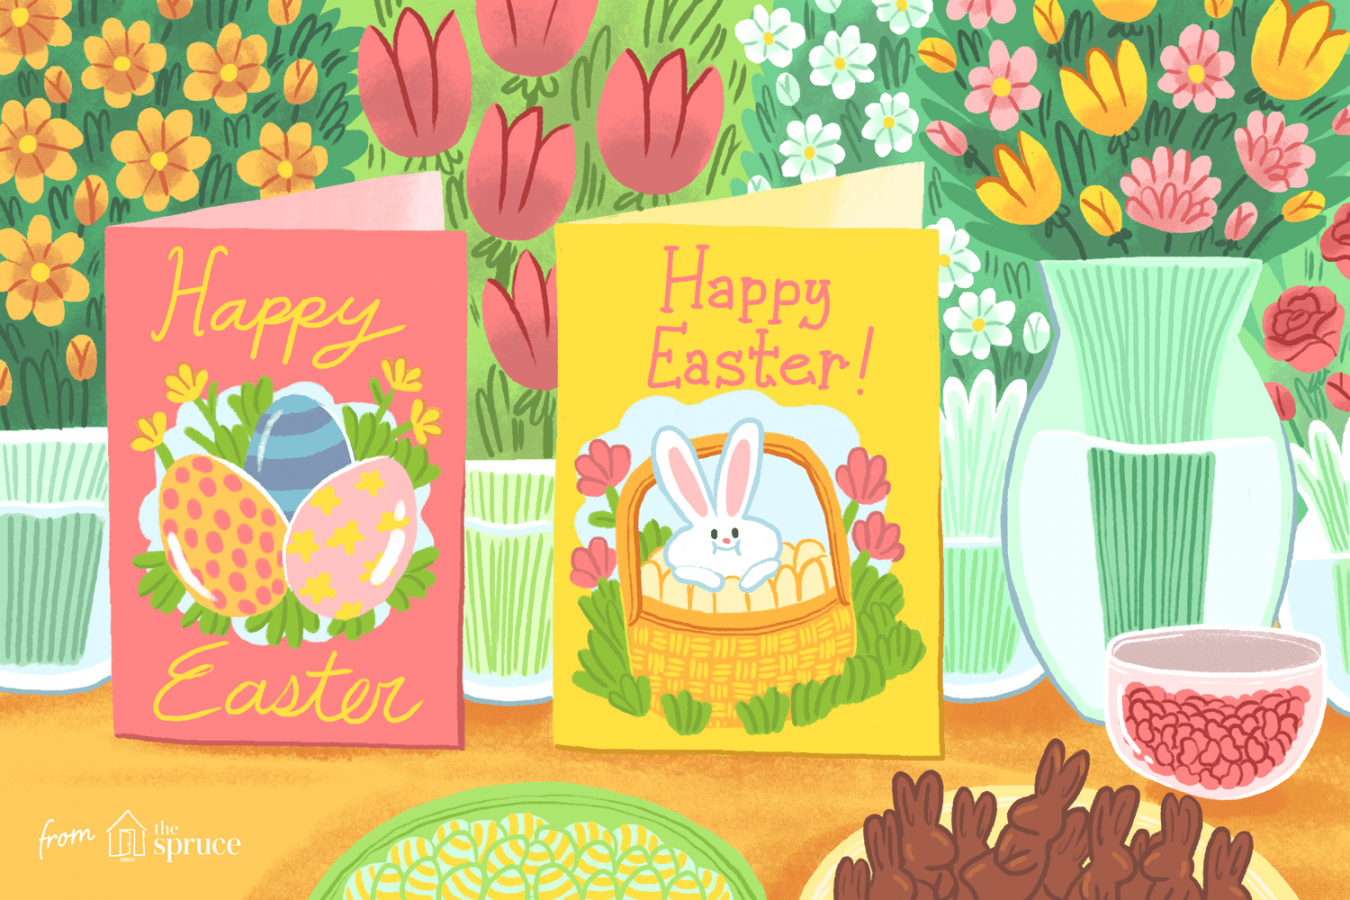 Free, Printable Easter Cards for Everyone You Know - FREE Printables - Free Printable Easter Card